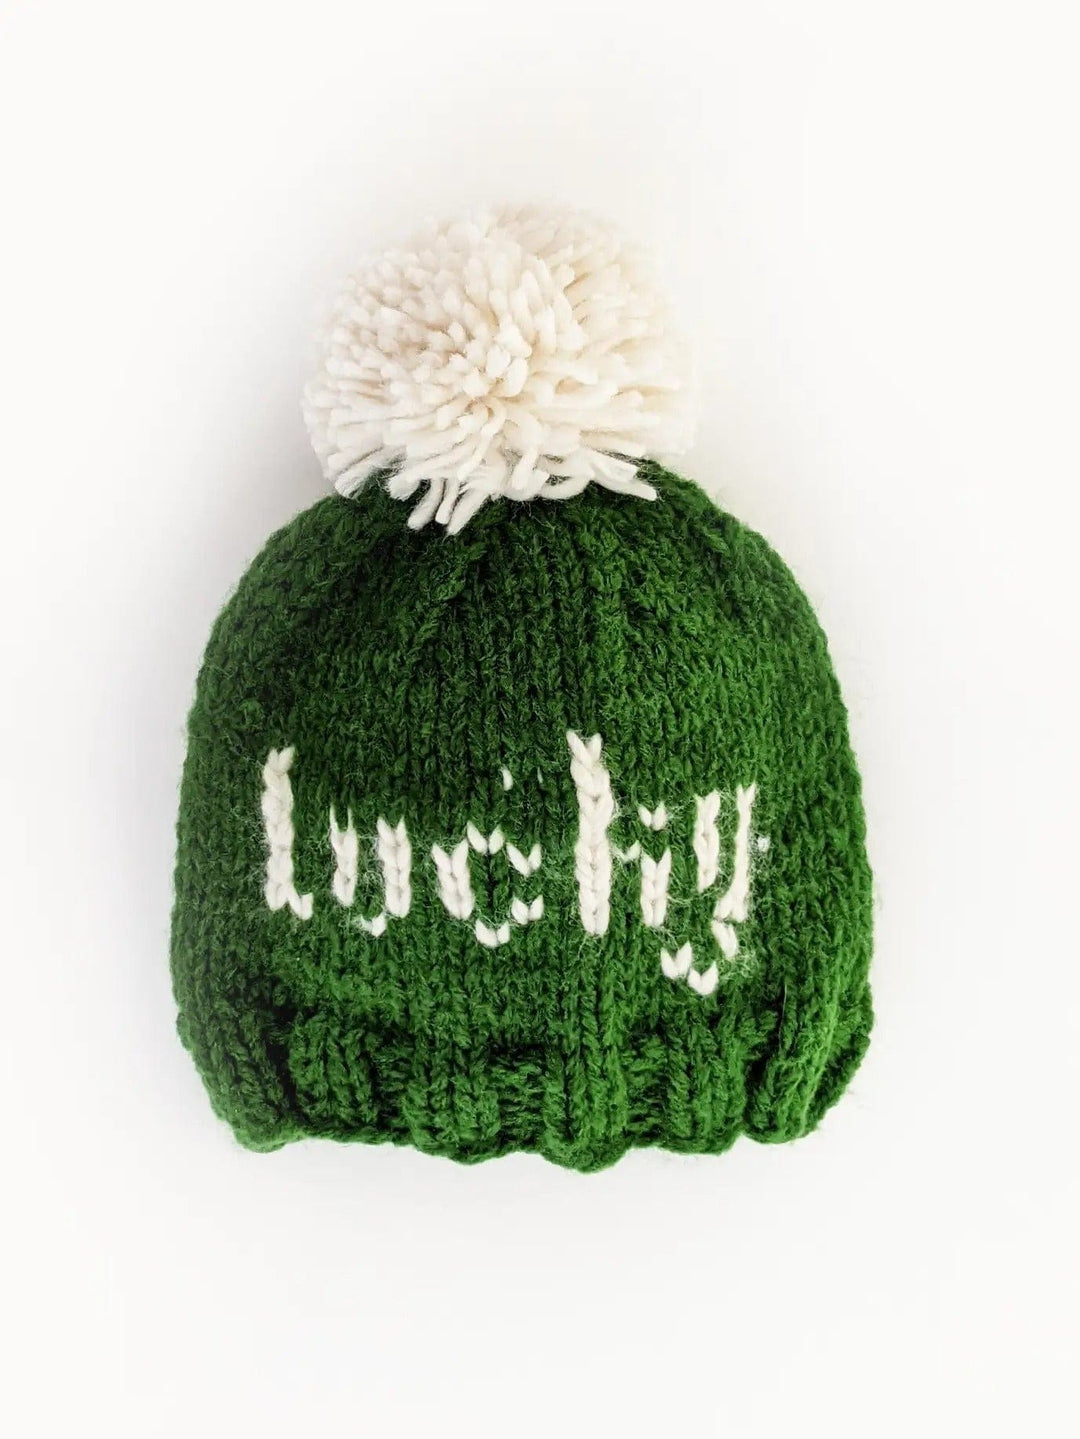 Huggalugs Beanie Lucky St. Patrick's Day Hand Knit Beanie Hat